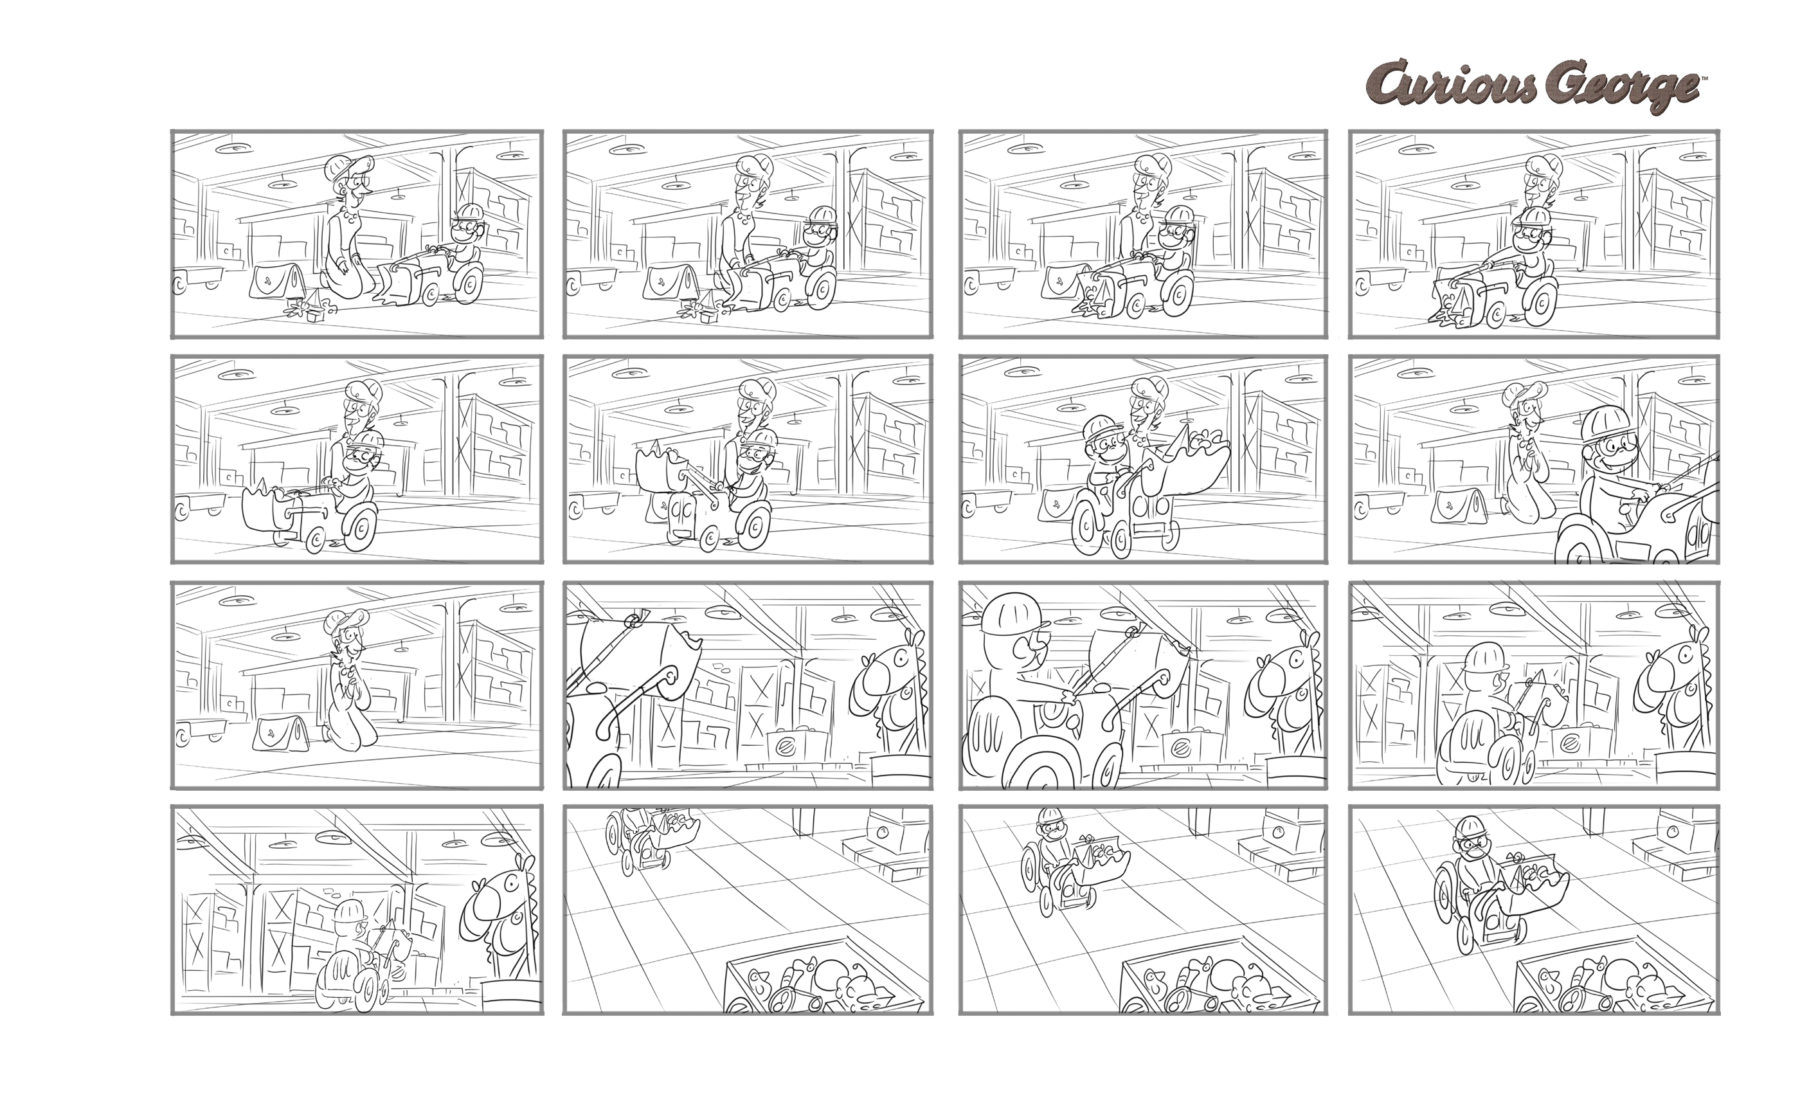 Storyboards by Bert Ring for the Curious George TV Special, Toy Monkey, Featuring Carol Burnett for Universal Animation Studios